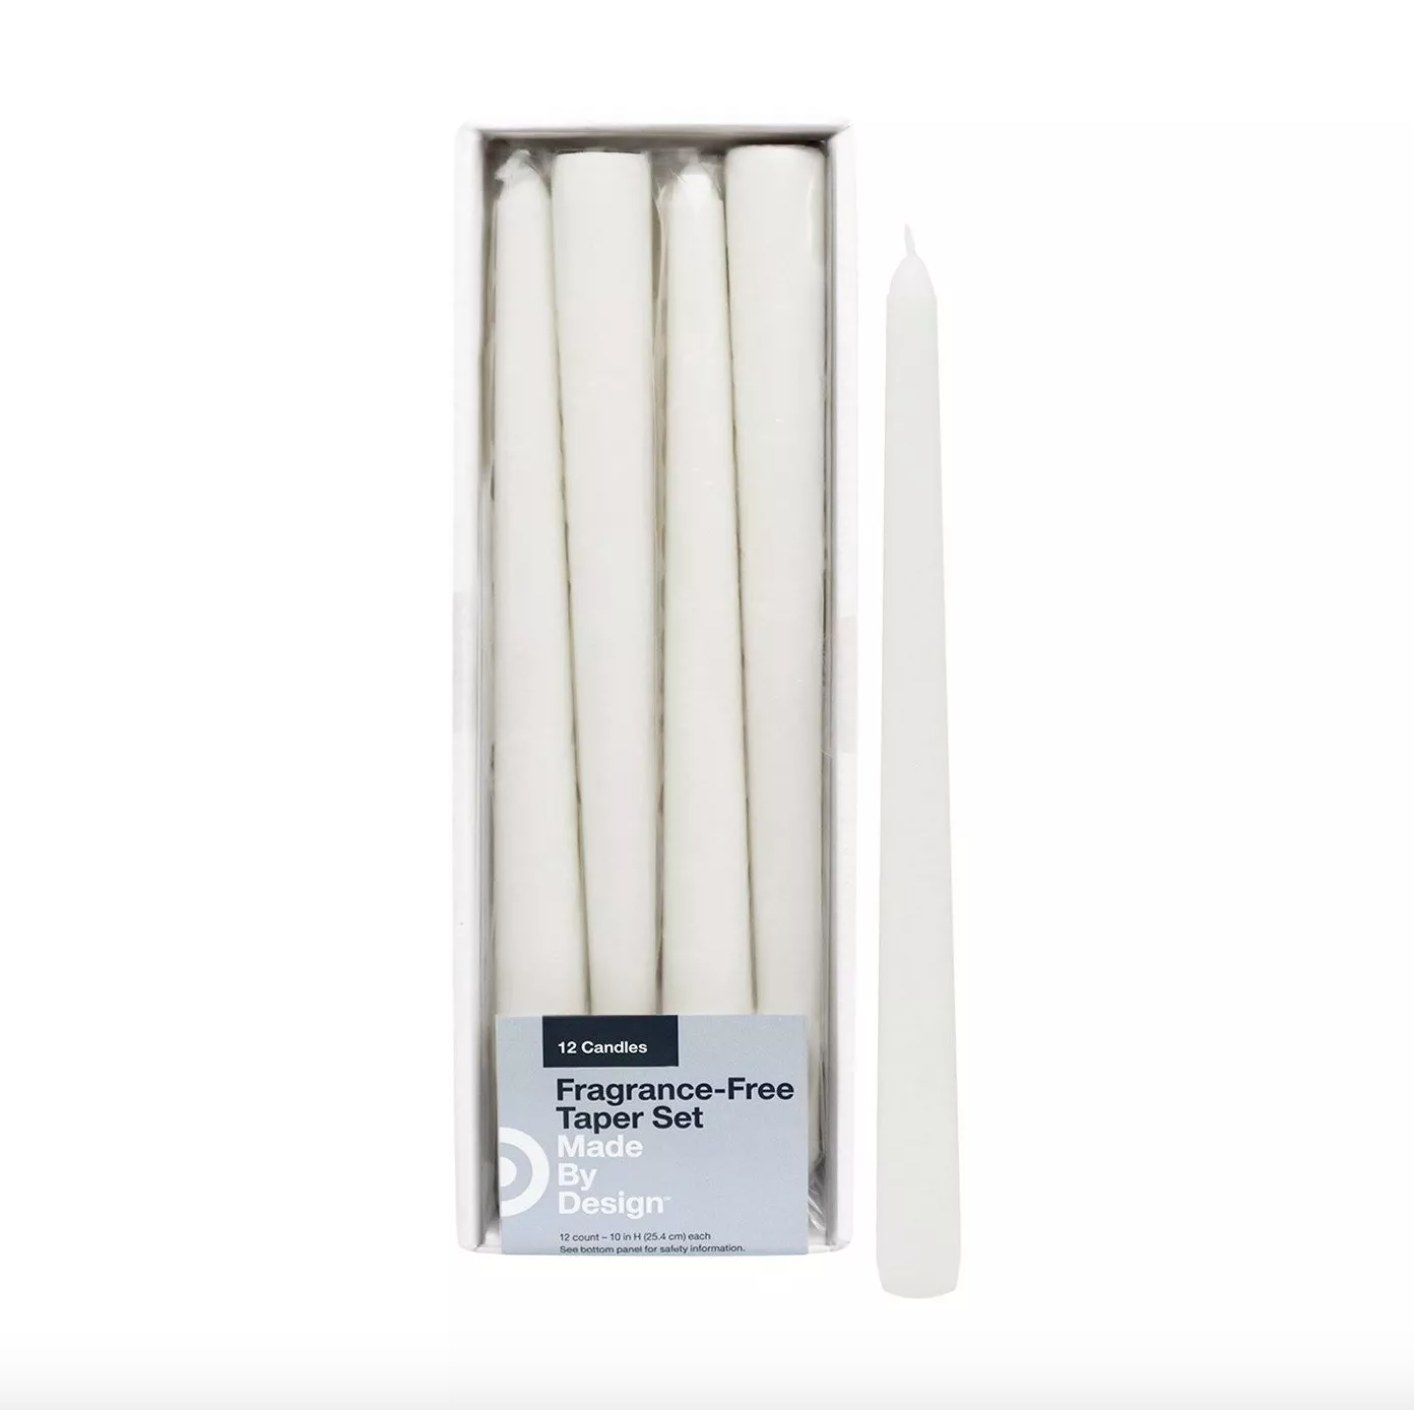 The unscented taper candles in white